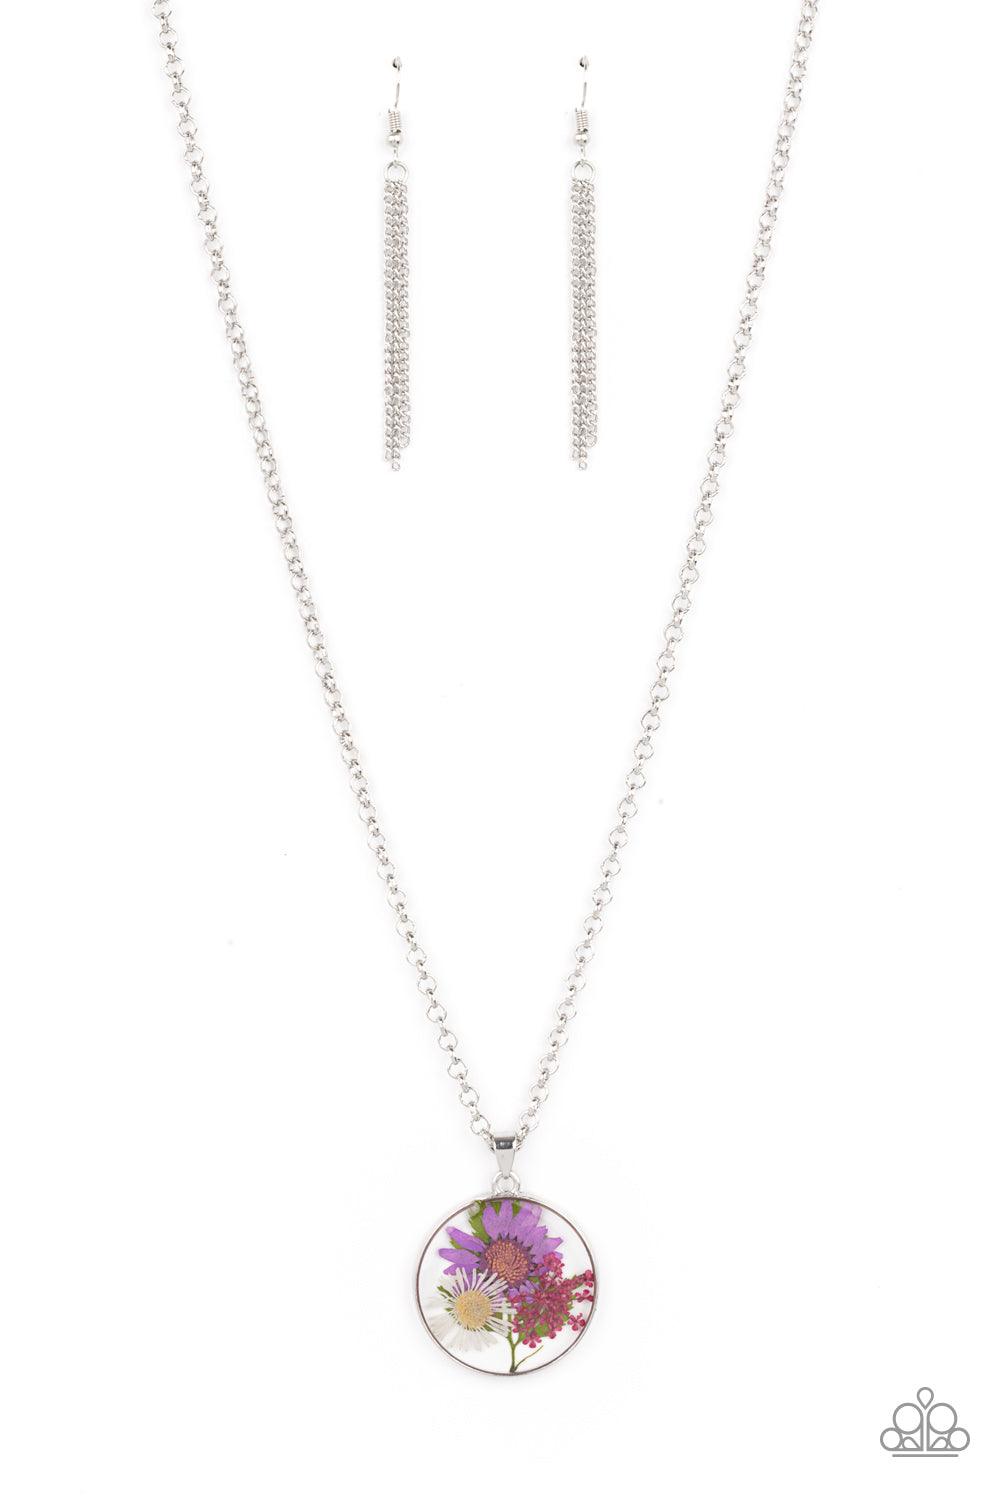 Paparazzi Accessories Evergreen Eden - Multi A leafy collection of colorful wildflowers is encased inside a glassy frame, creating a whimsical pendant at the bottom of the lengthened silver chain. Features an adjustable clasp closure. Sold as one individu